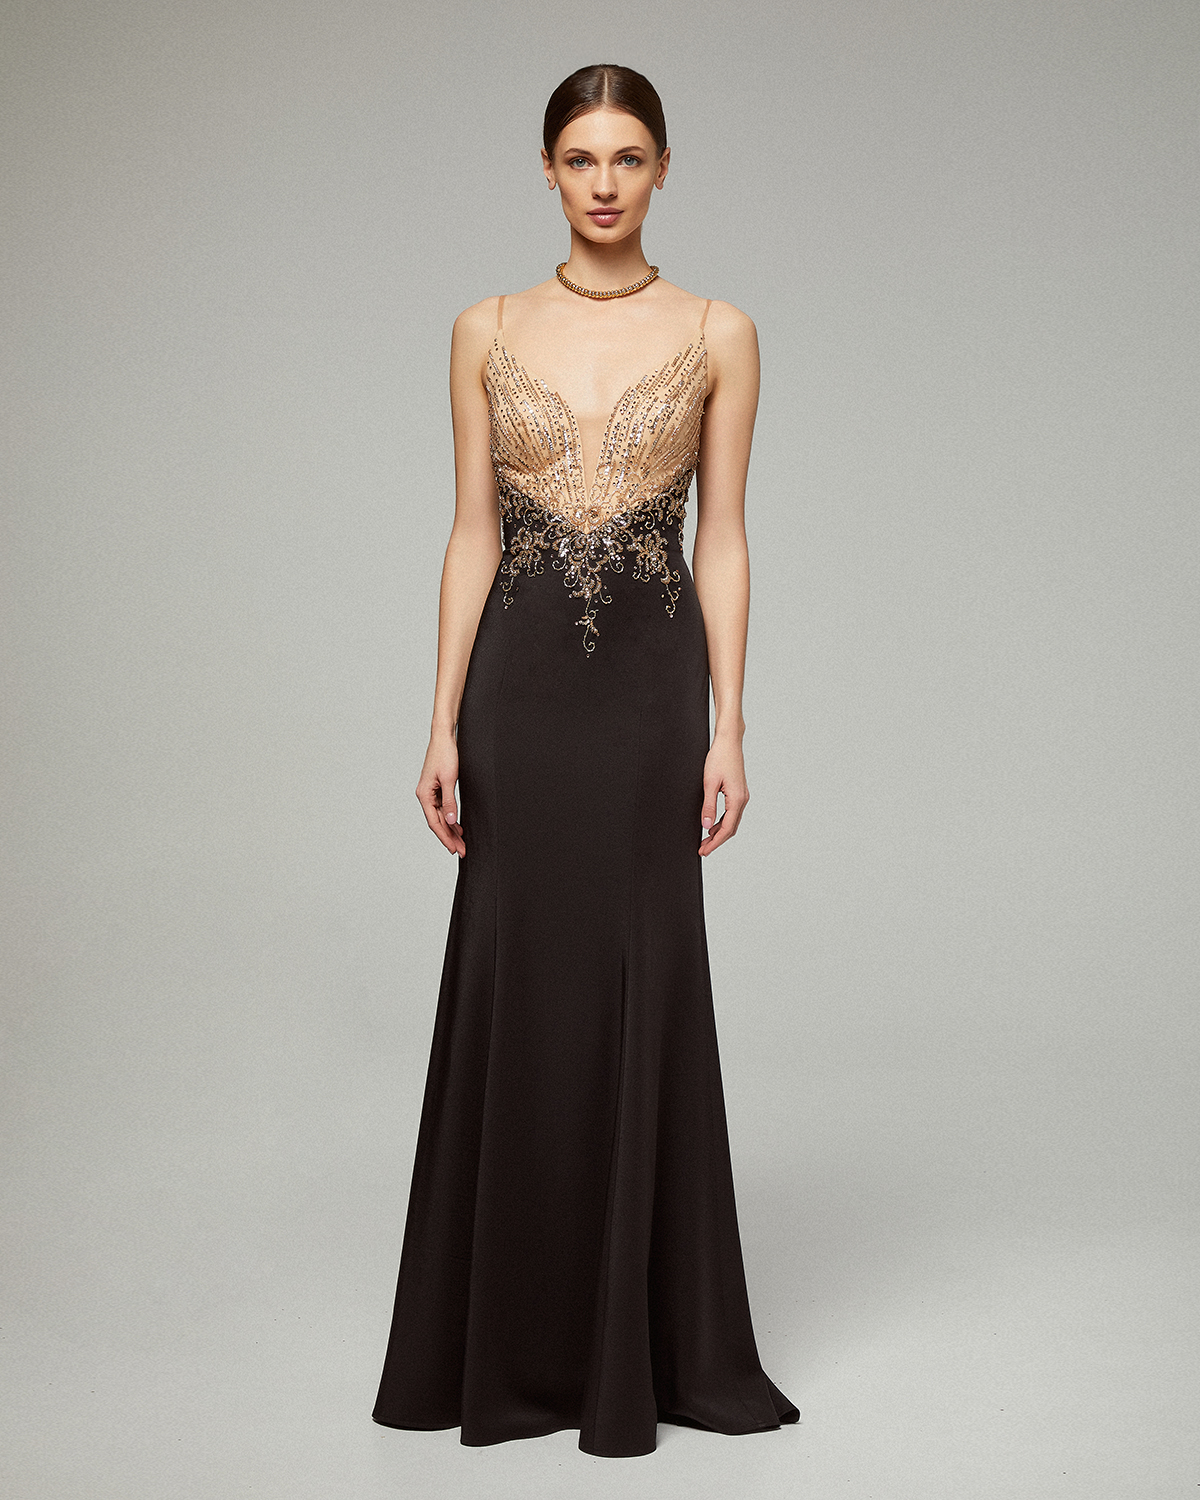 Long evening dress with beading on the top and open back